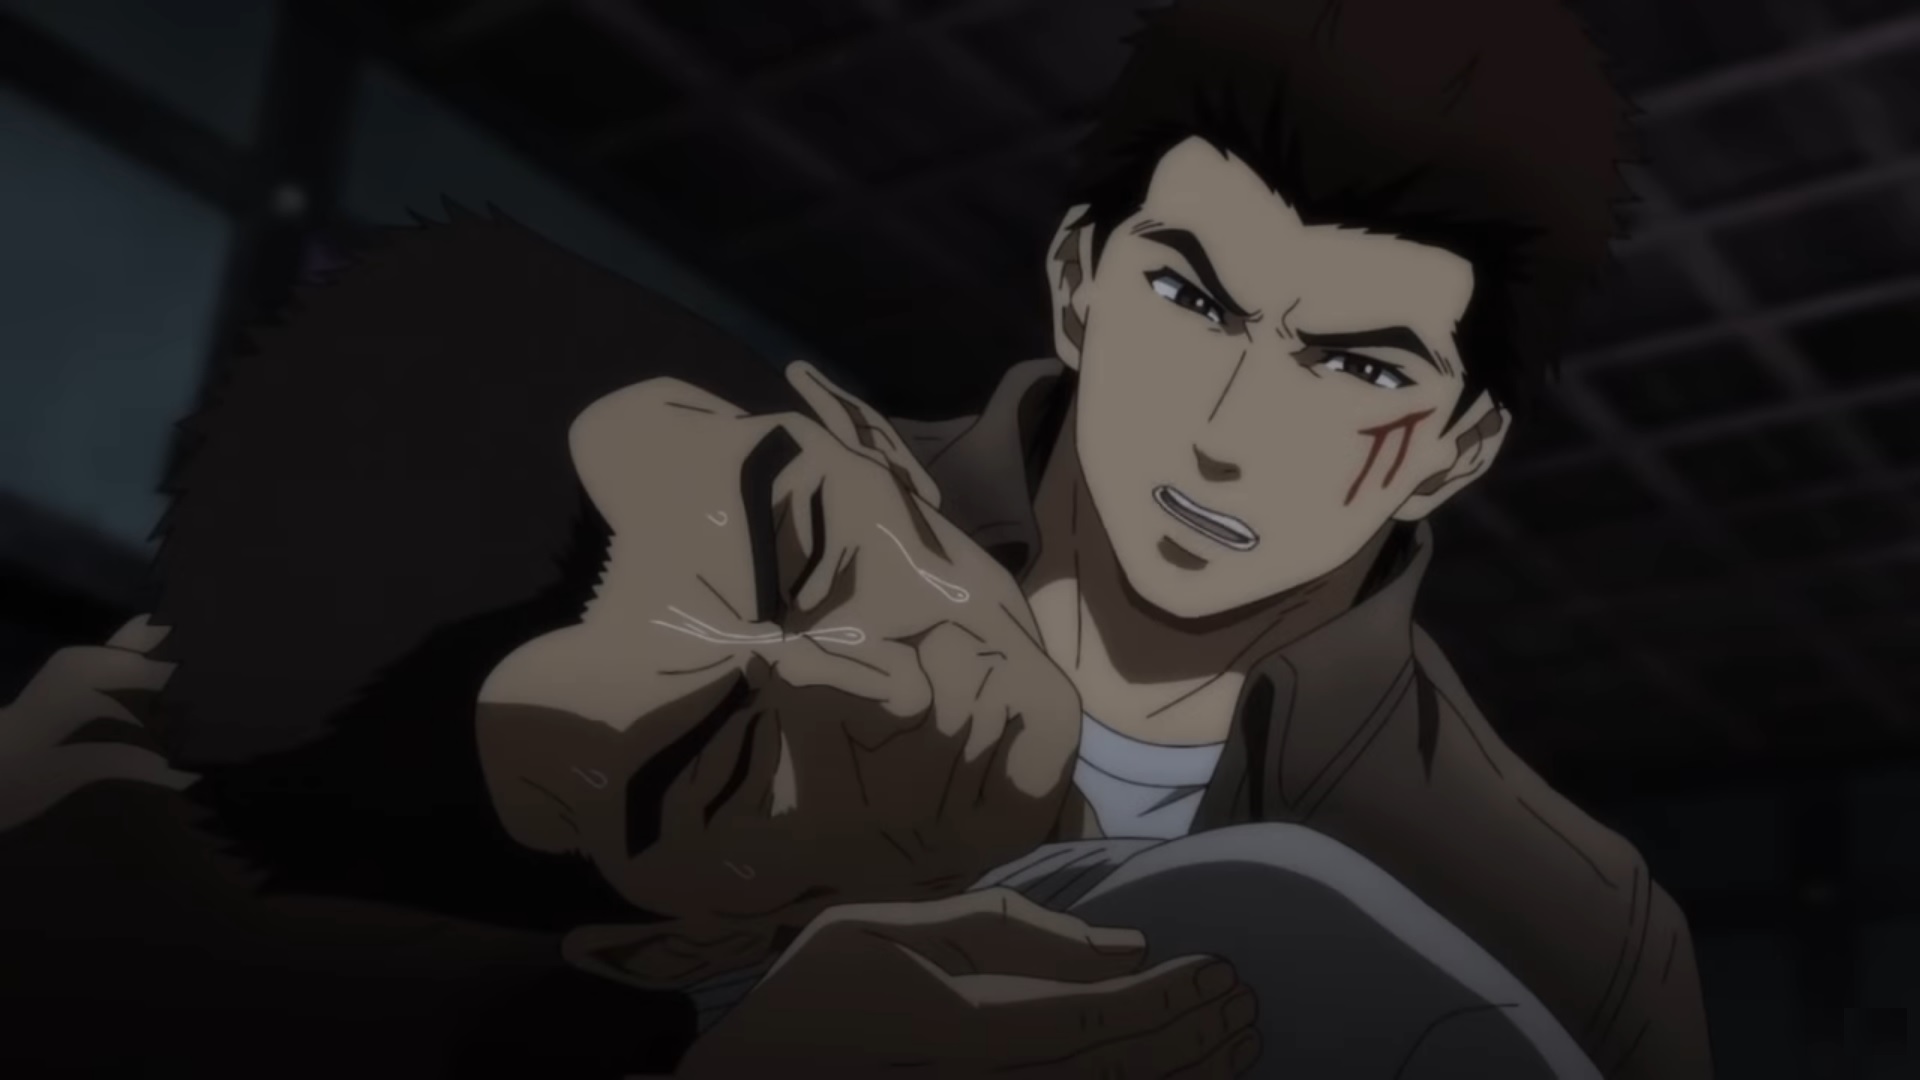 Watch the official trailer and premiere date for Shenmue: The Animation